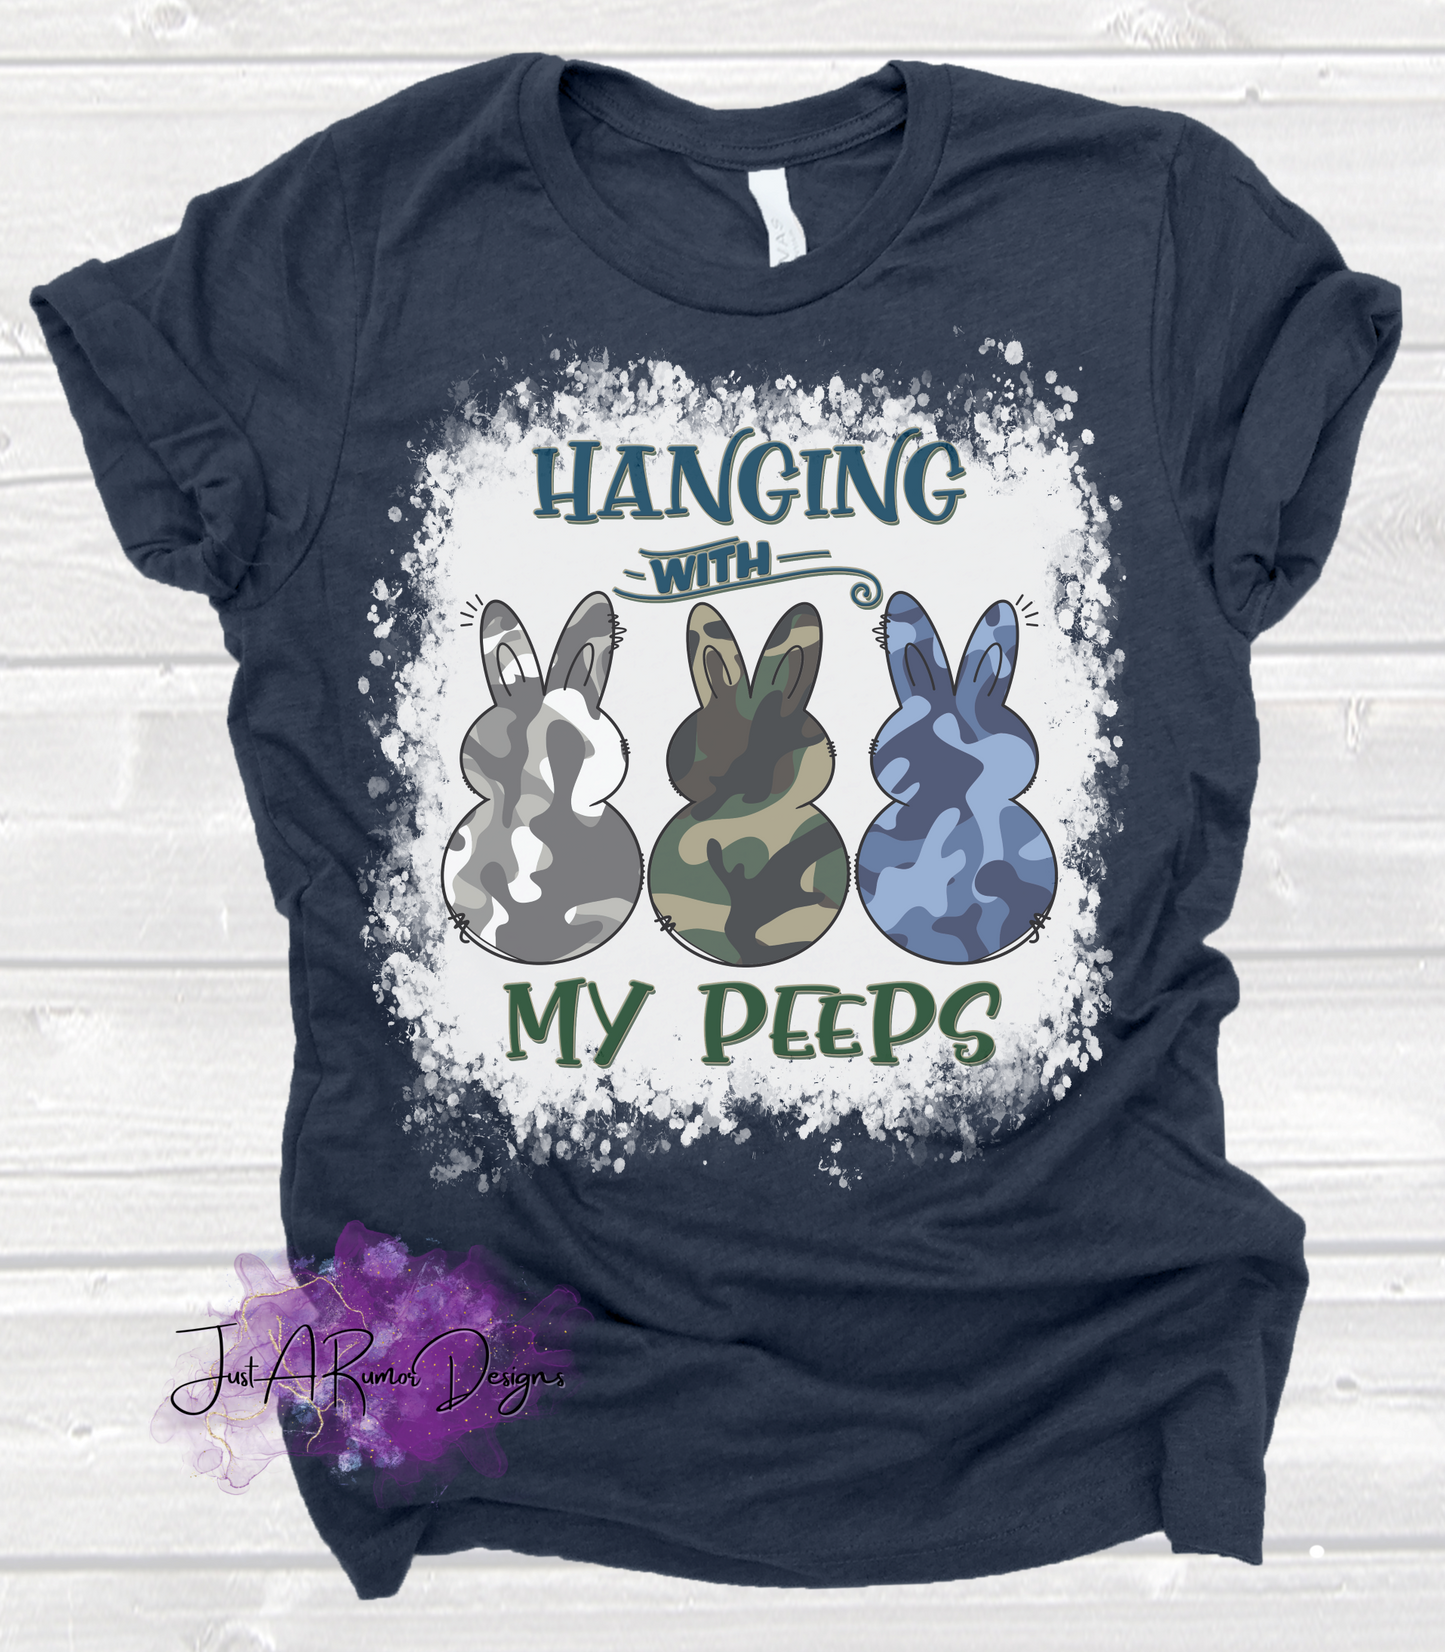 Hanging with my Peeps Shirt